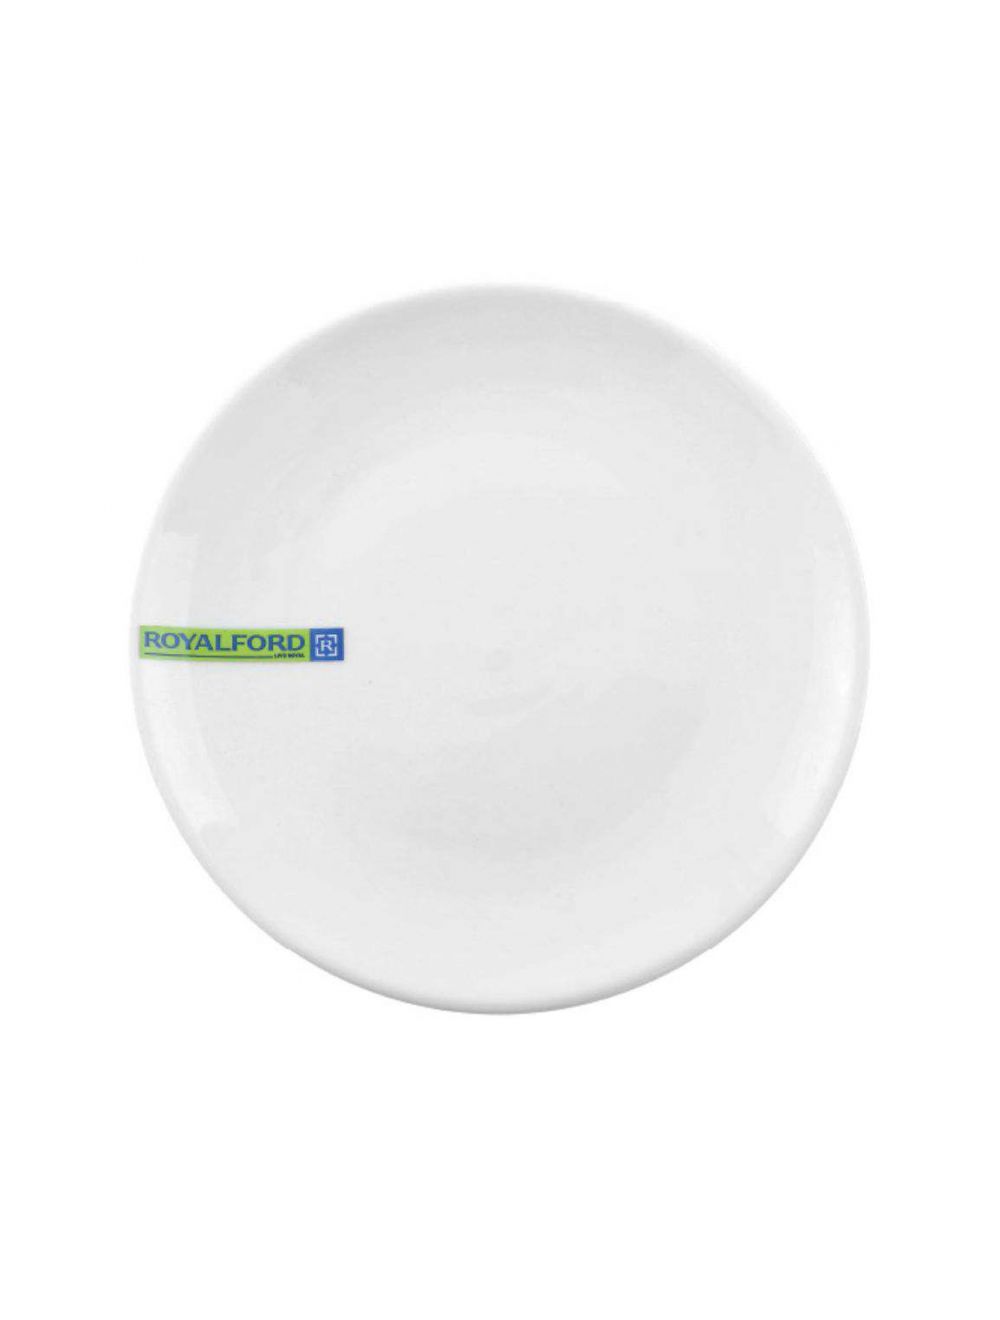 Royalford RF7996 Porcelain Magnesia Flat Plate, 6 Inch